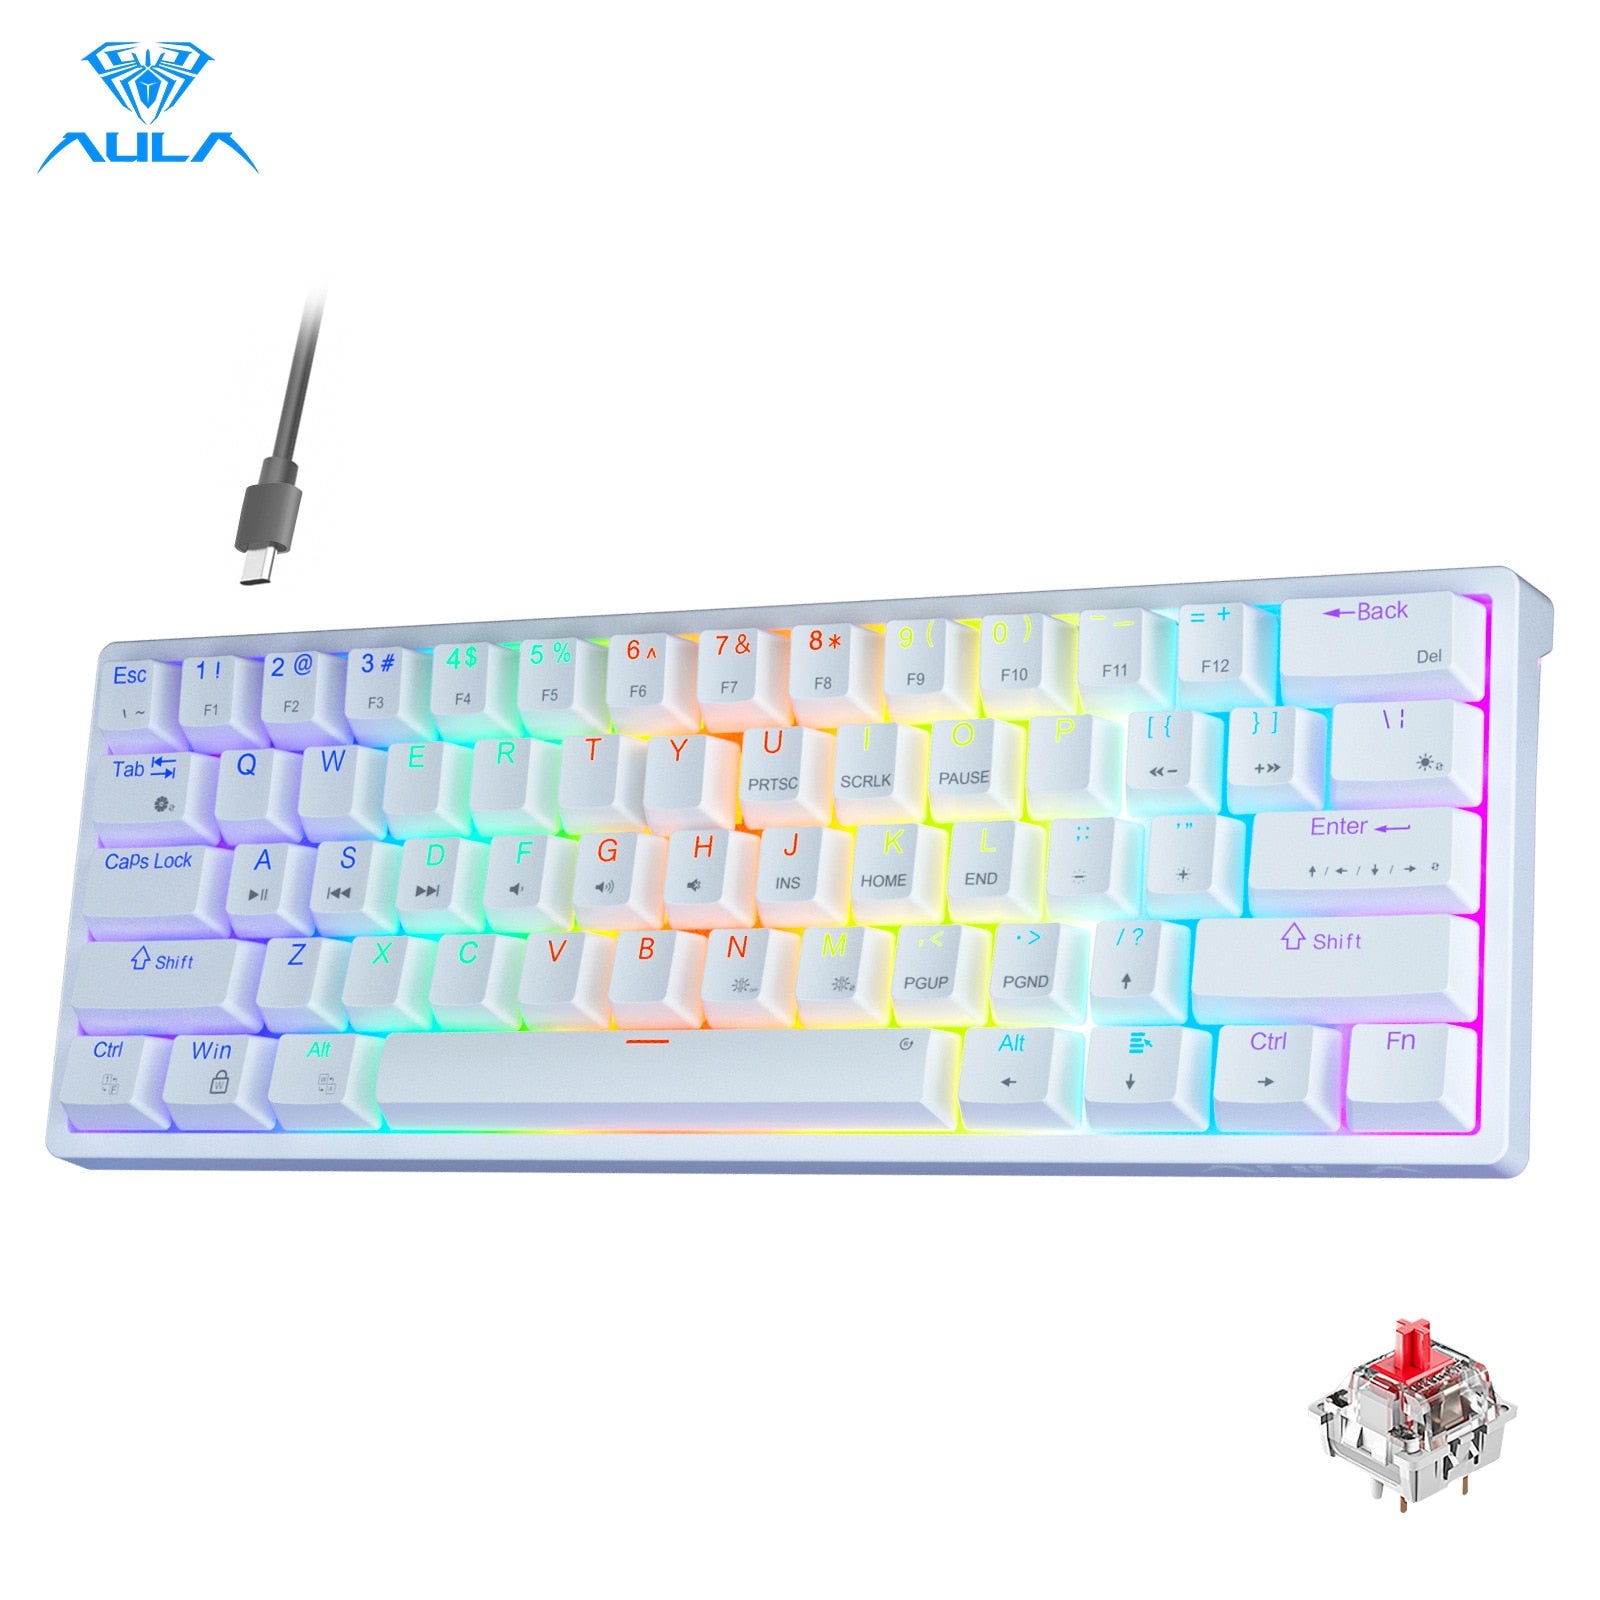 AULA F3261 RGB effect USB Mini Mechanical Gaming Keyboard Red Switch 61 Keys Wired Separated detachable cable for Mac Windows